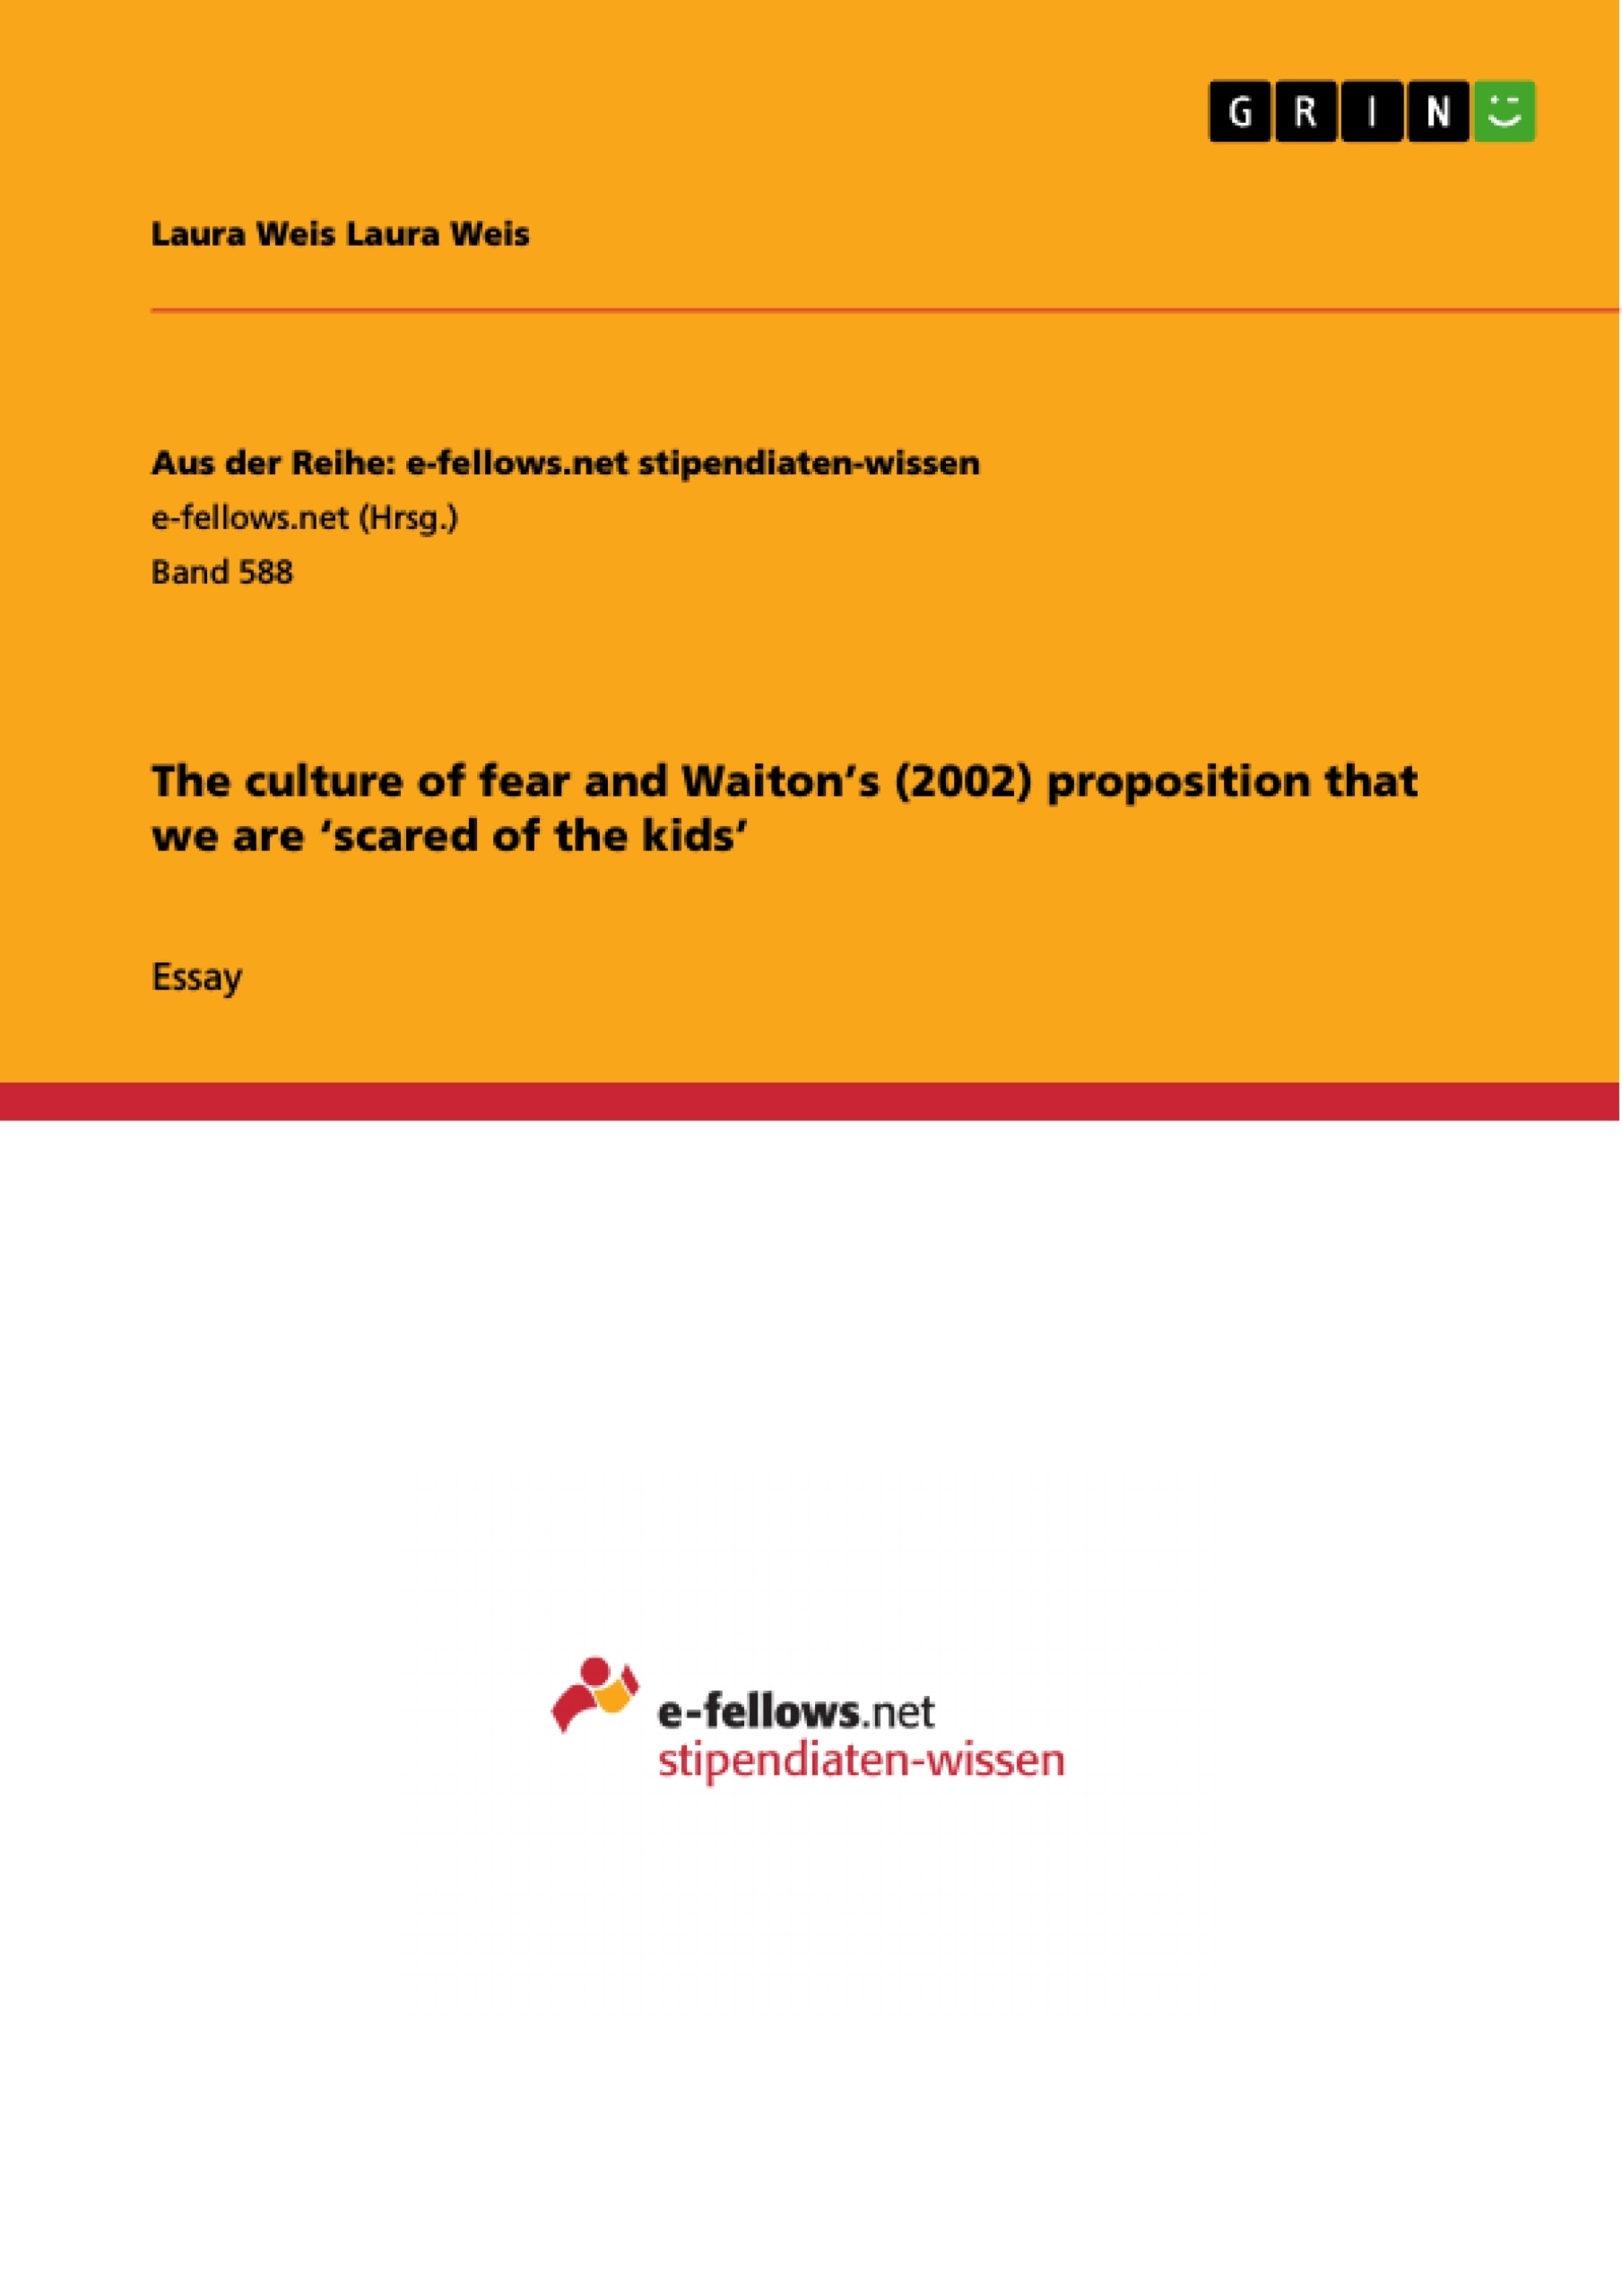 Titel: The culture of fear and Waiton’s (2002) proposition that we are ‘scared of the kids’